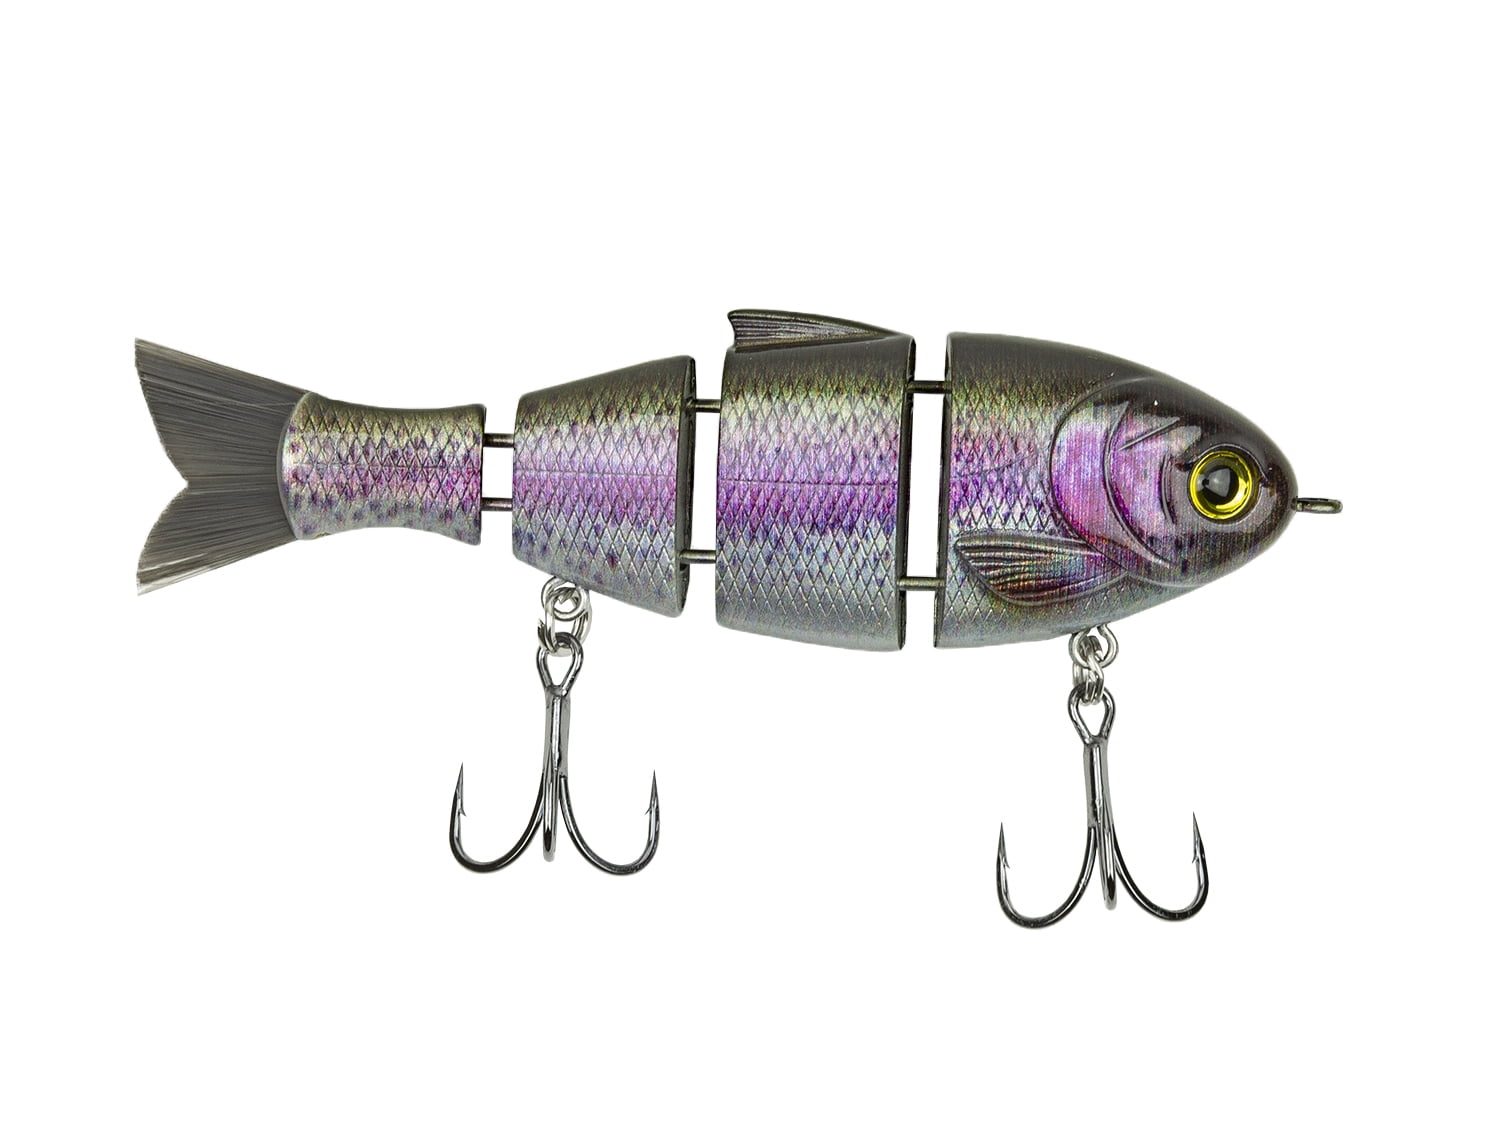 3.75 Baby Bull Shad Swimbait - Mike Bucca Catch Co. Rainbow Trout